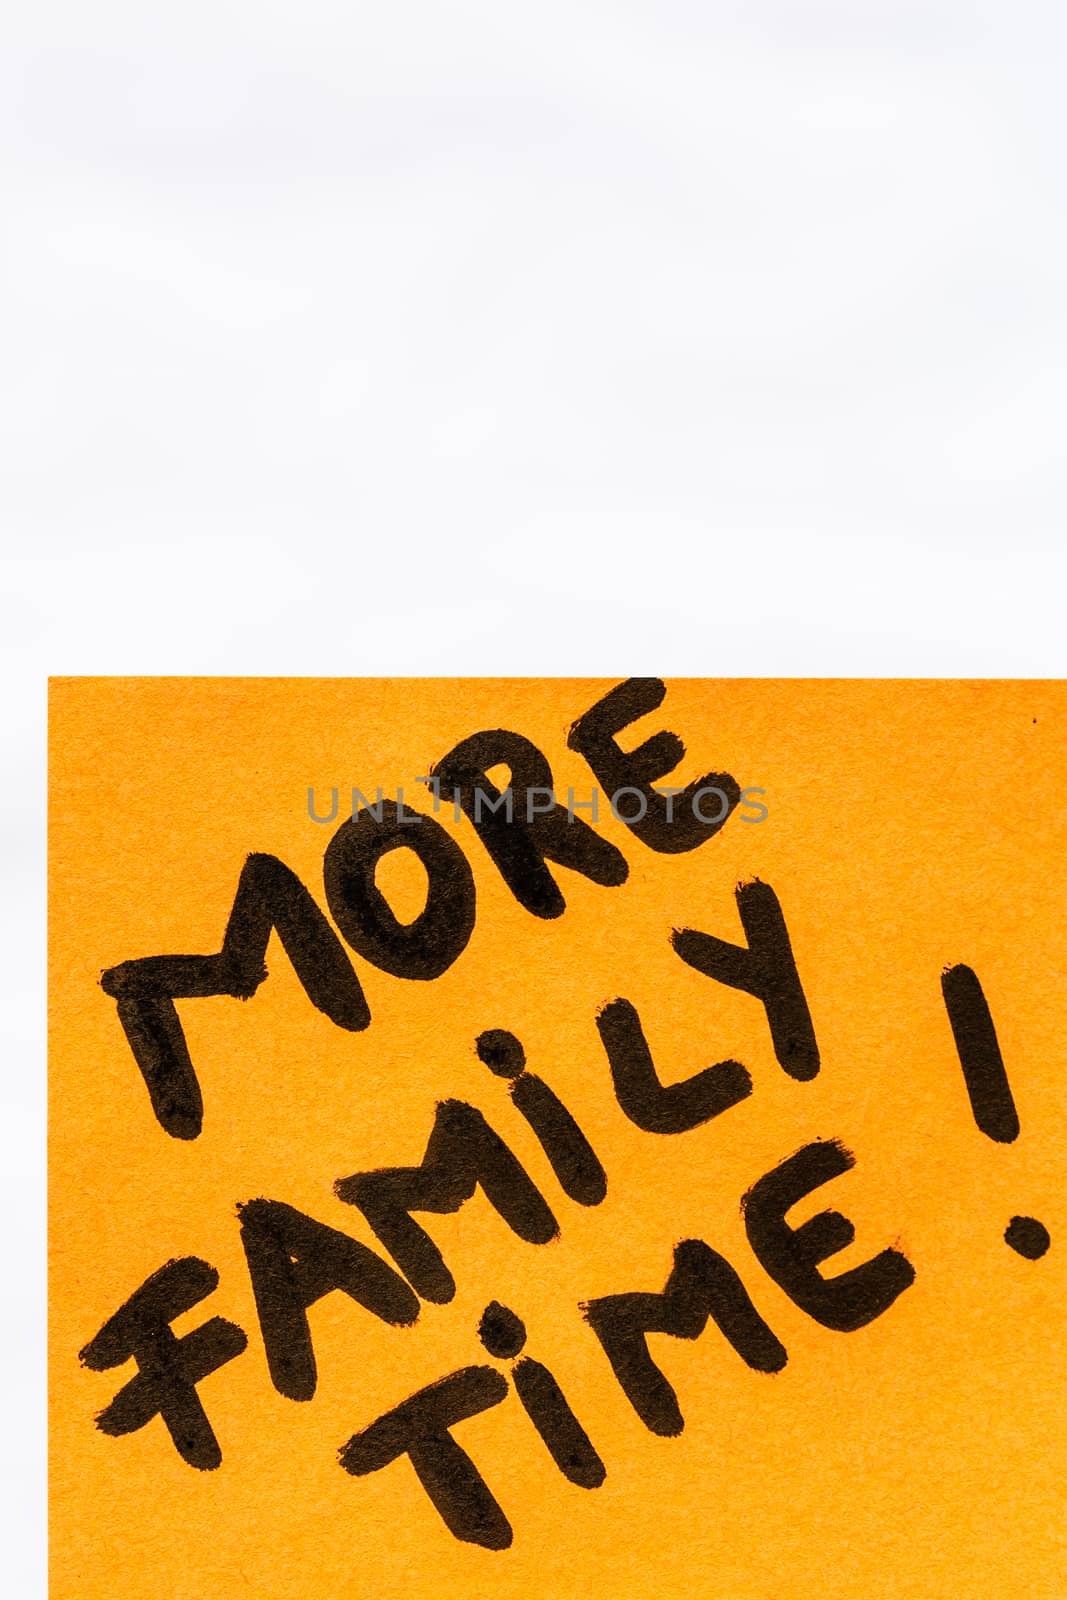 More family time handwriting text close up isolated on orange pa by vladispas